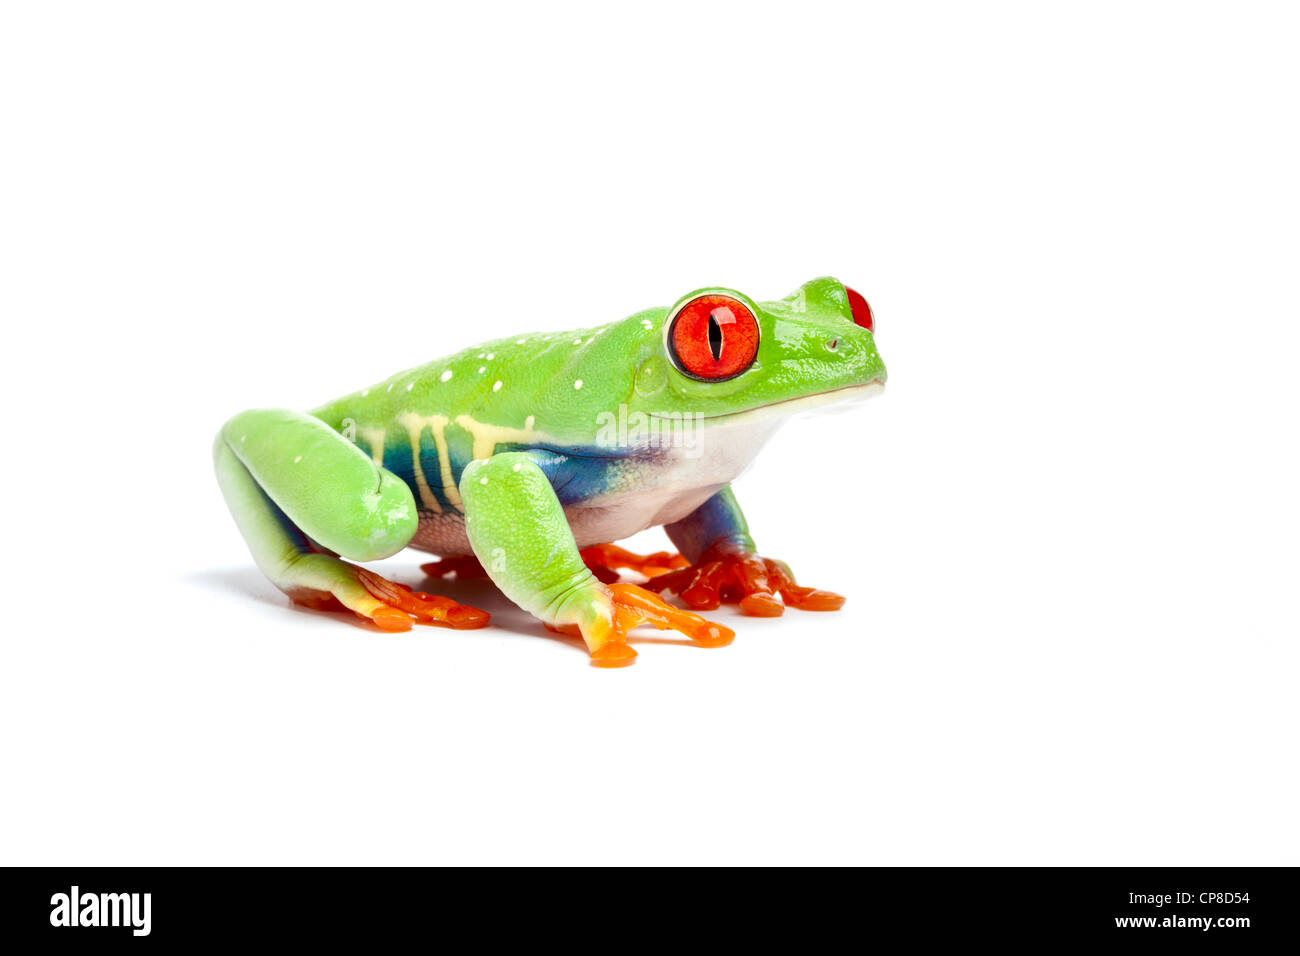 Red-eyed tree frog, ou, agalychnis callidryas, Costa Rica Banque D'Images